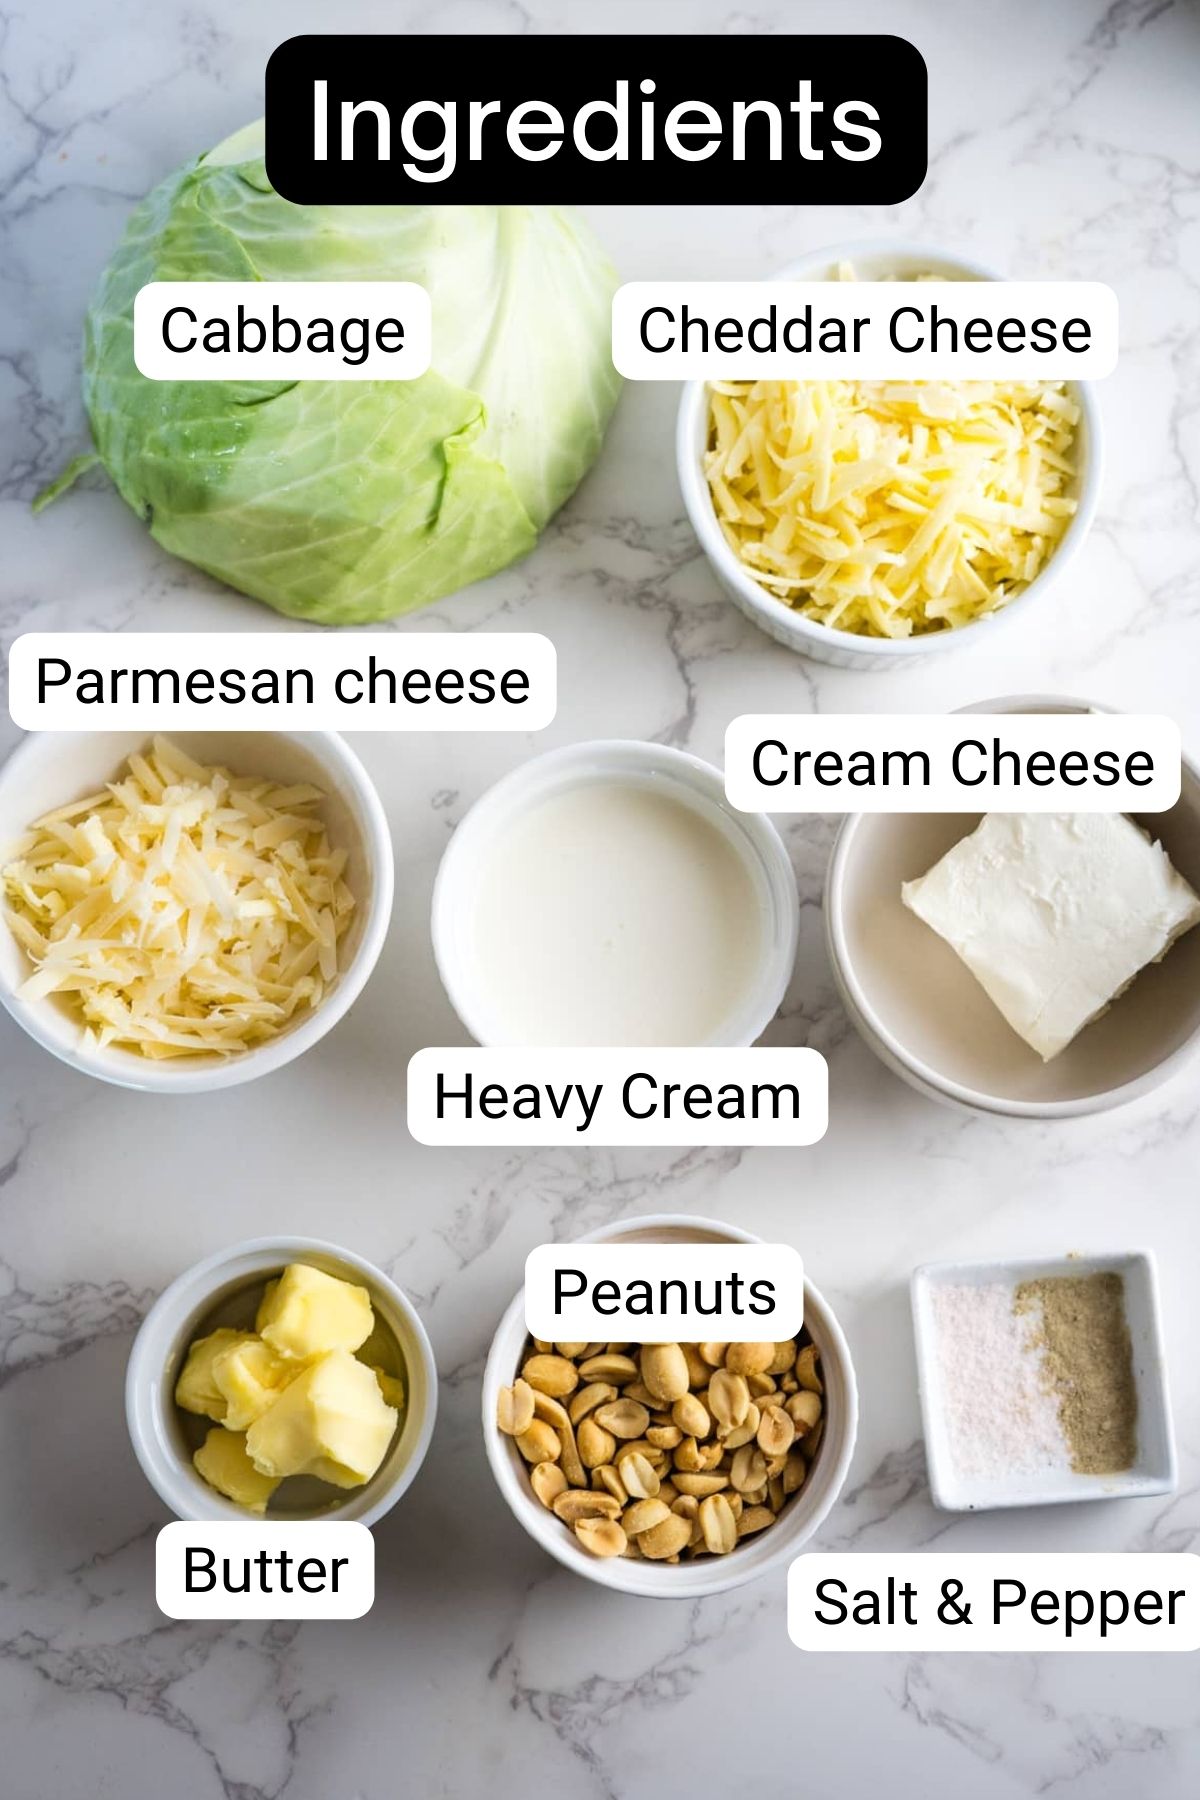 A list of ingredients for a cabbage salad.